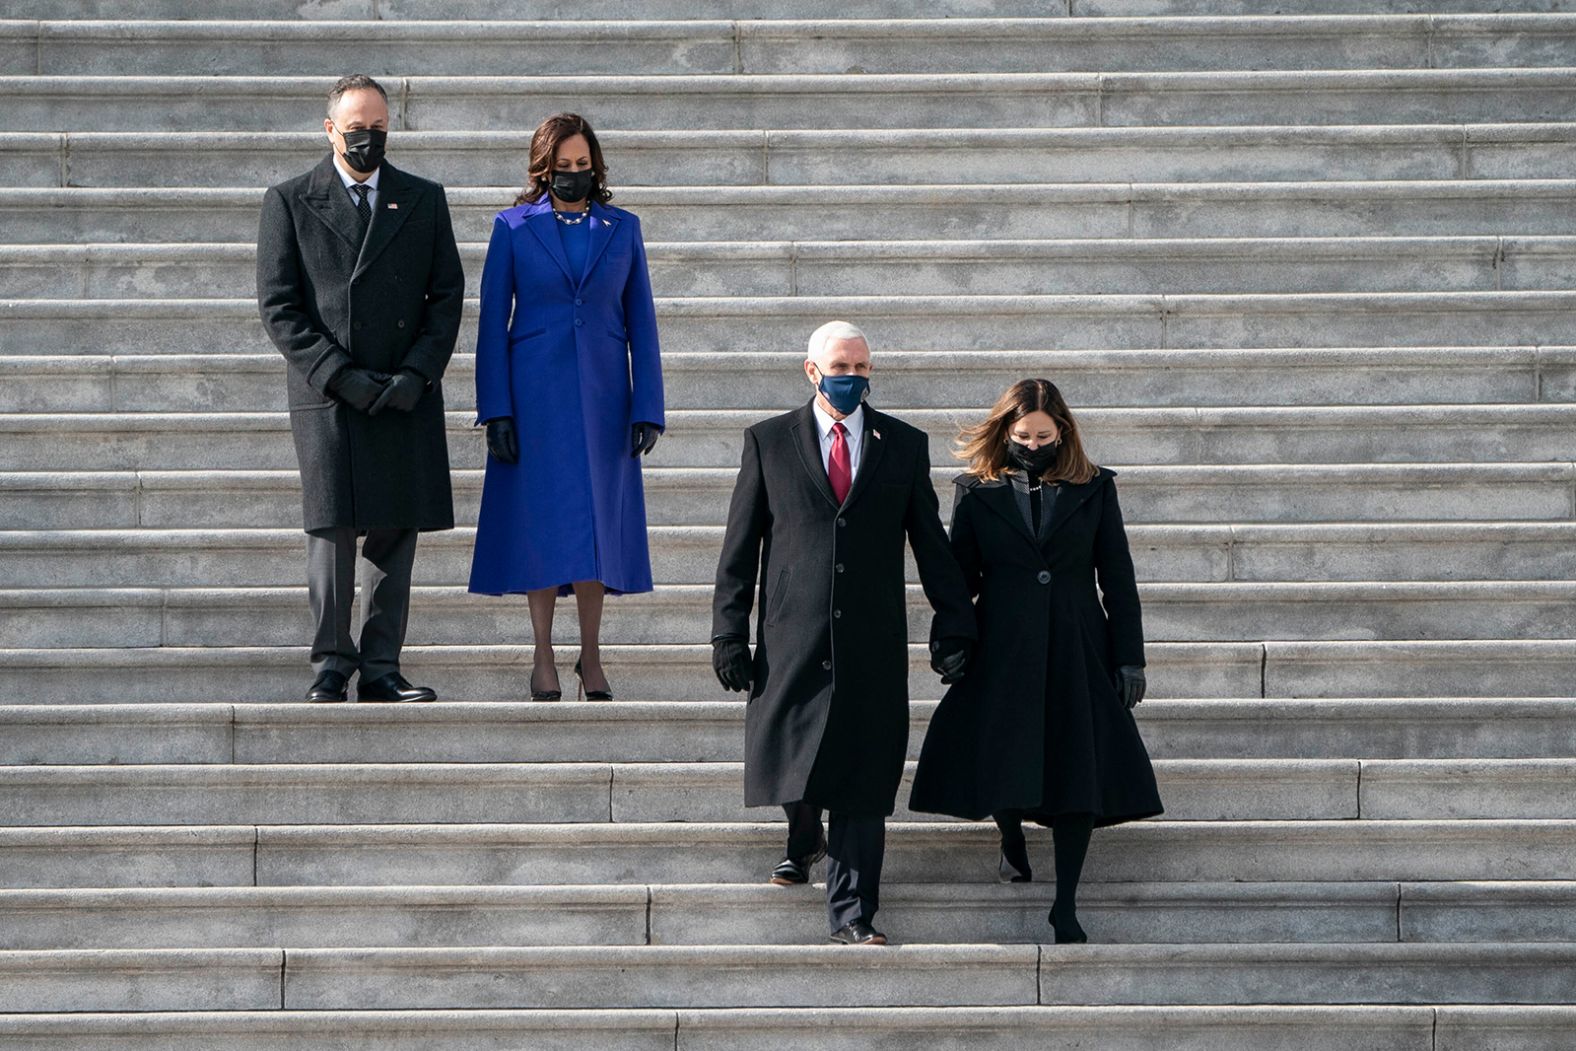 Pence and his wife, Karen, are trailed by his successor, Kamala Harris, and her husband, Doug Emhoff, after <a href="index.php?page=&url=http%3A%2F%2Fwww.cnn.com%2F2021%2F01%2F19%2Fpolitics%2Fgallery%2Fjoe-biden-inauguration-photos%2Findex.html" target="_blank">the inauguration</a> in January 2021.